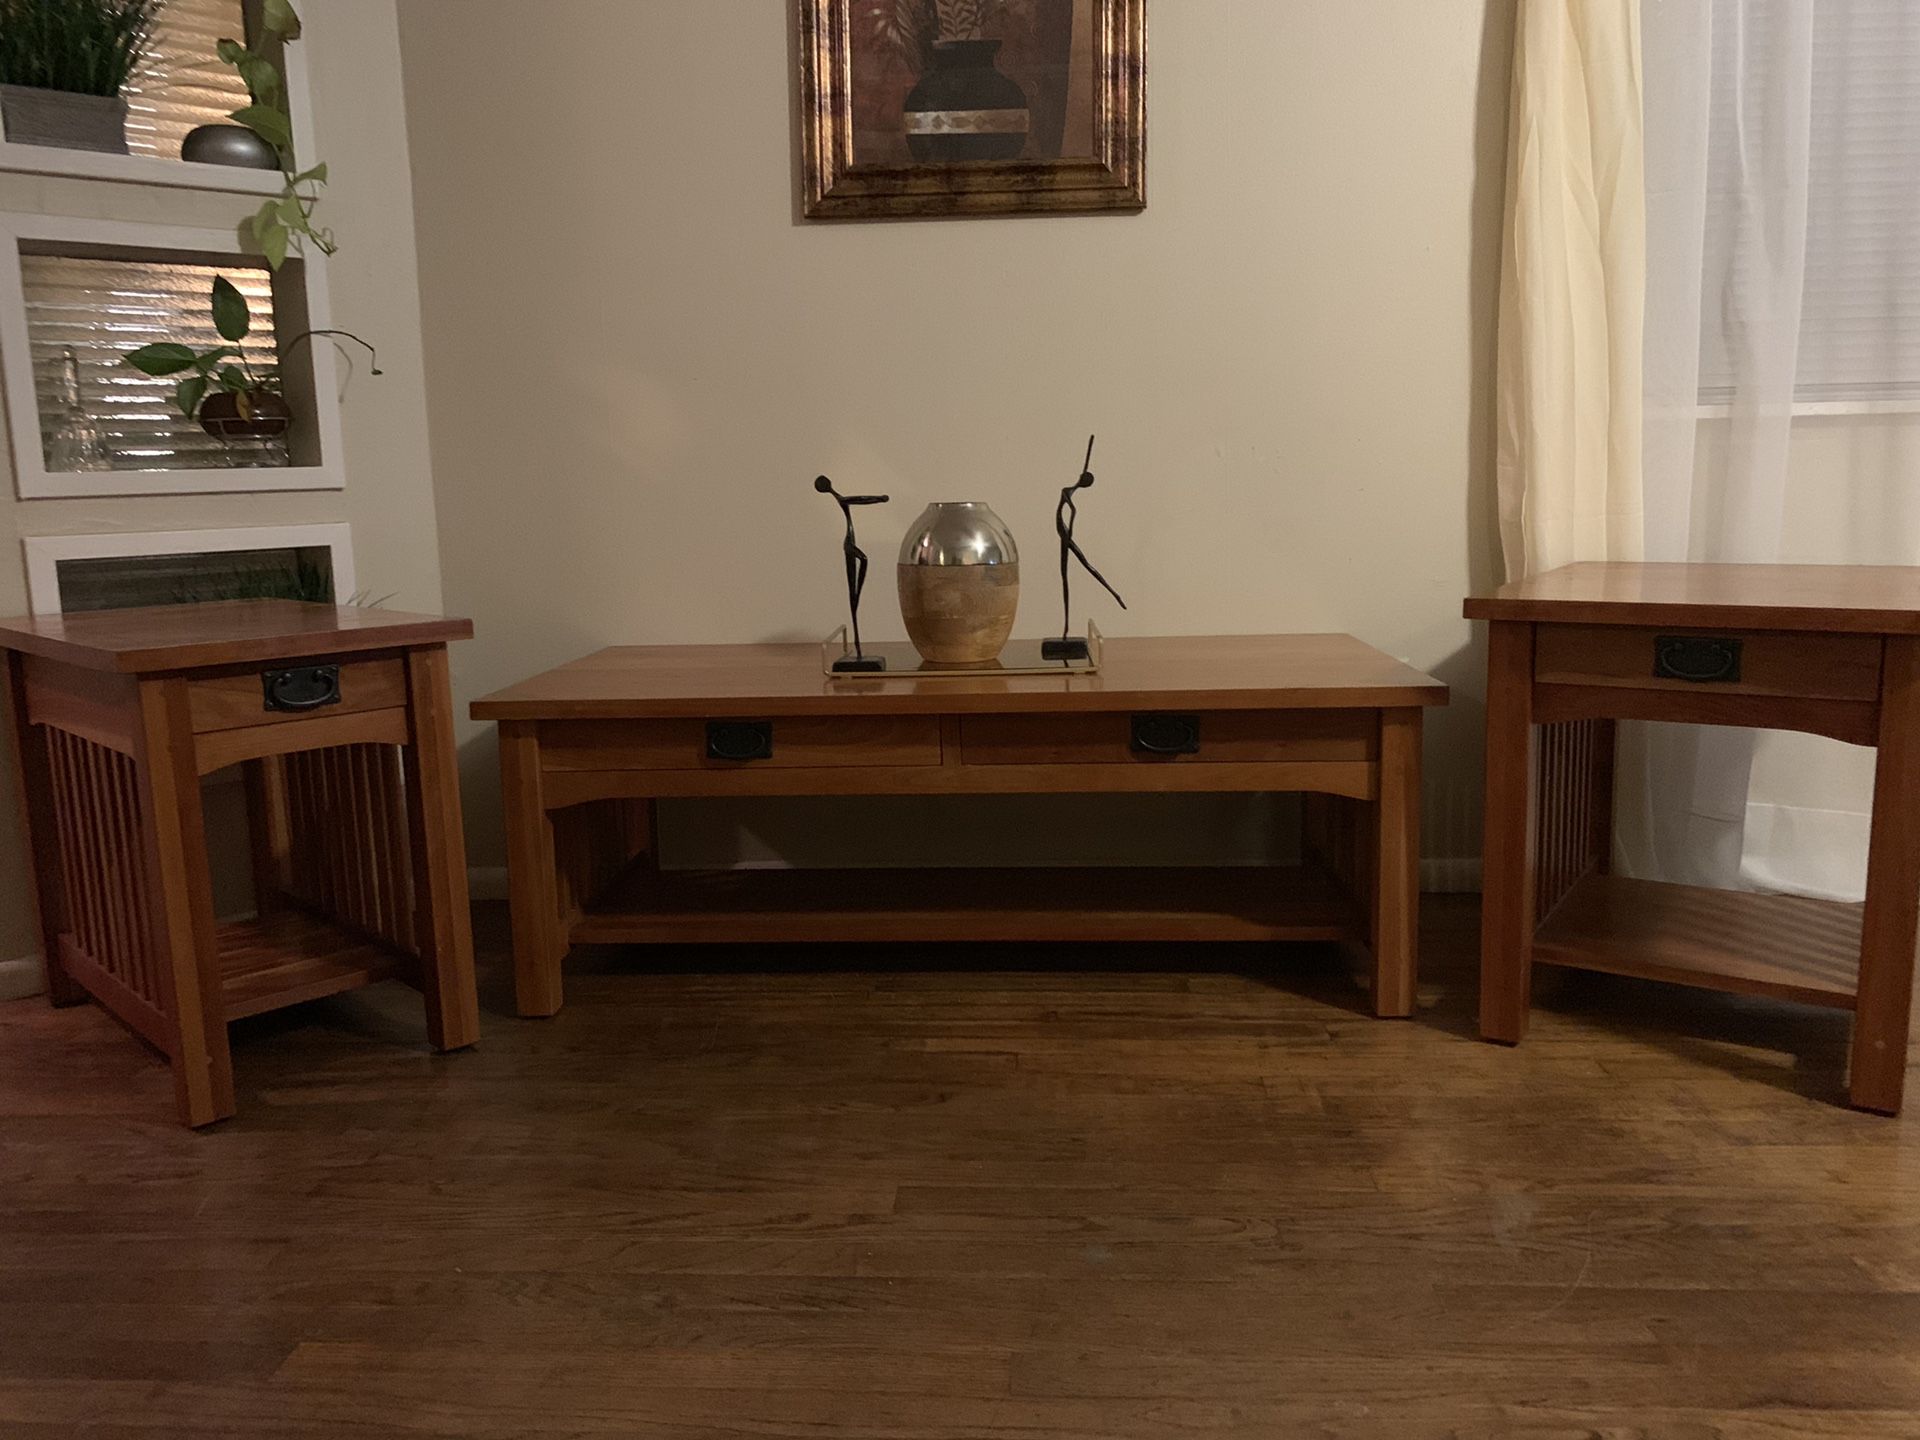 Real wood end tables set